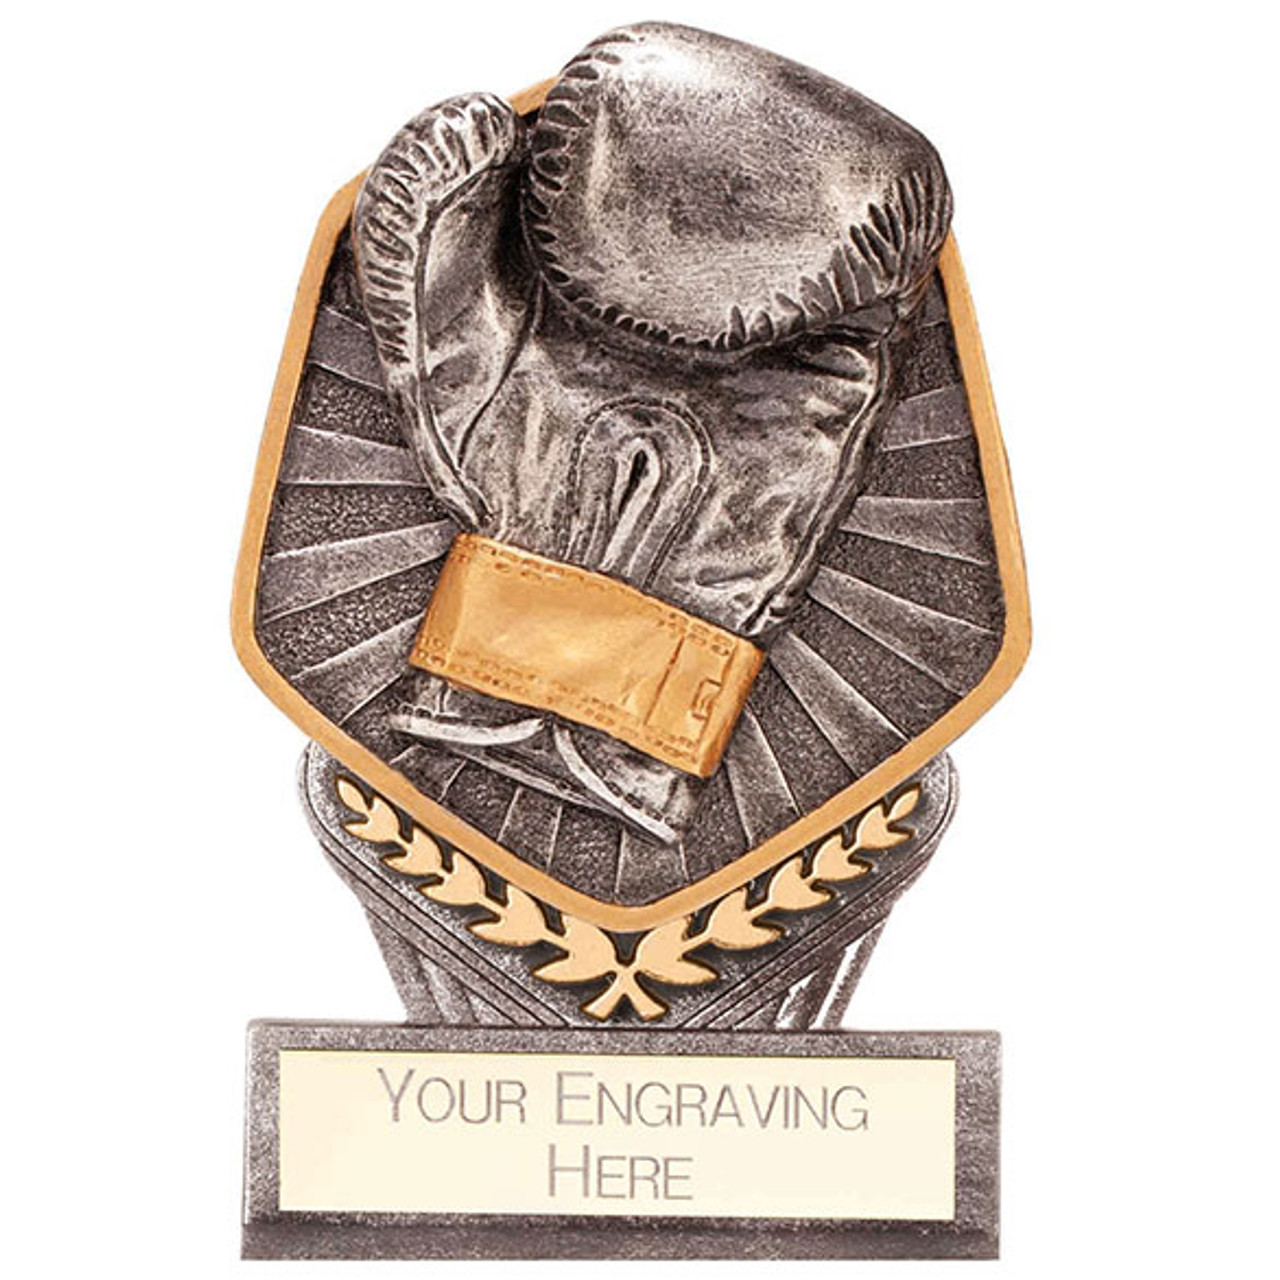 FALCON Resin Boxing Glove Boxing Trophy